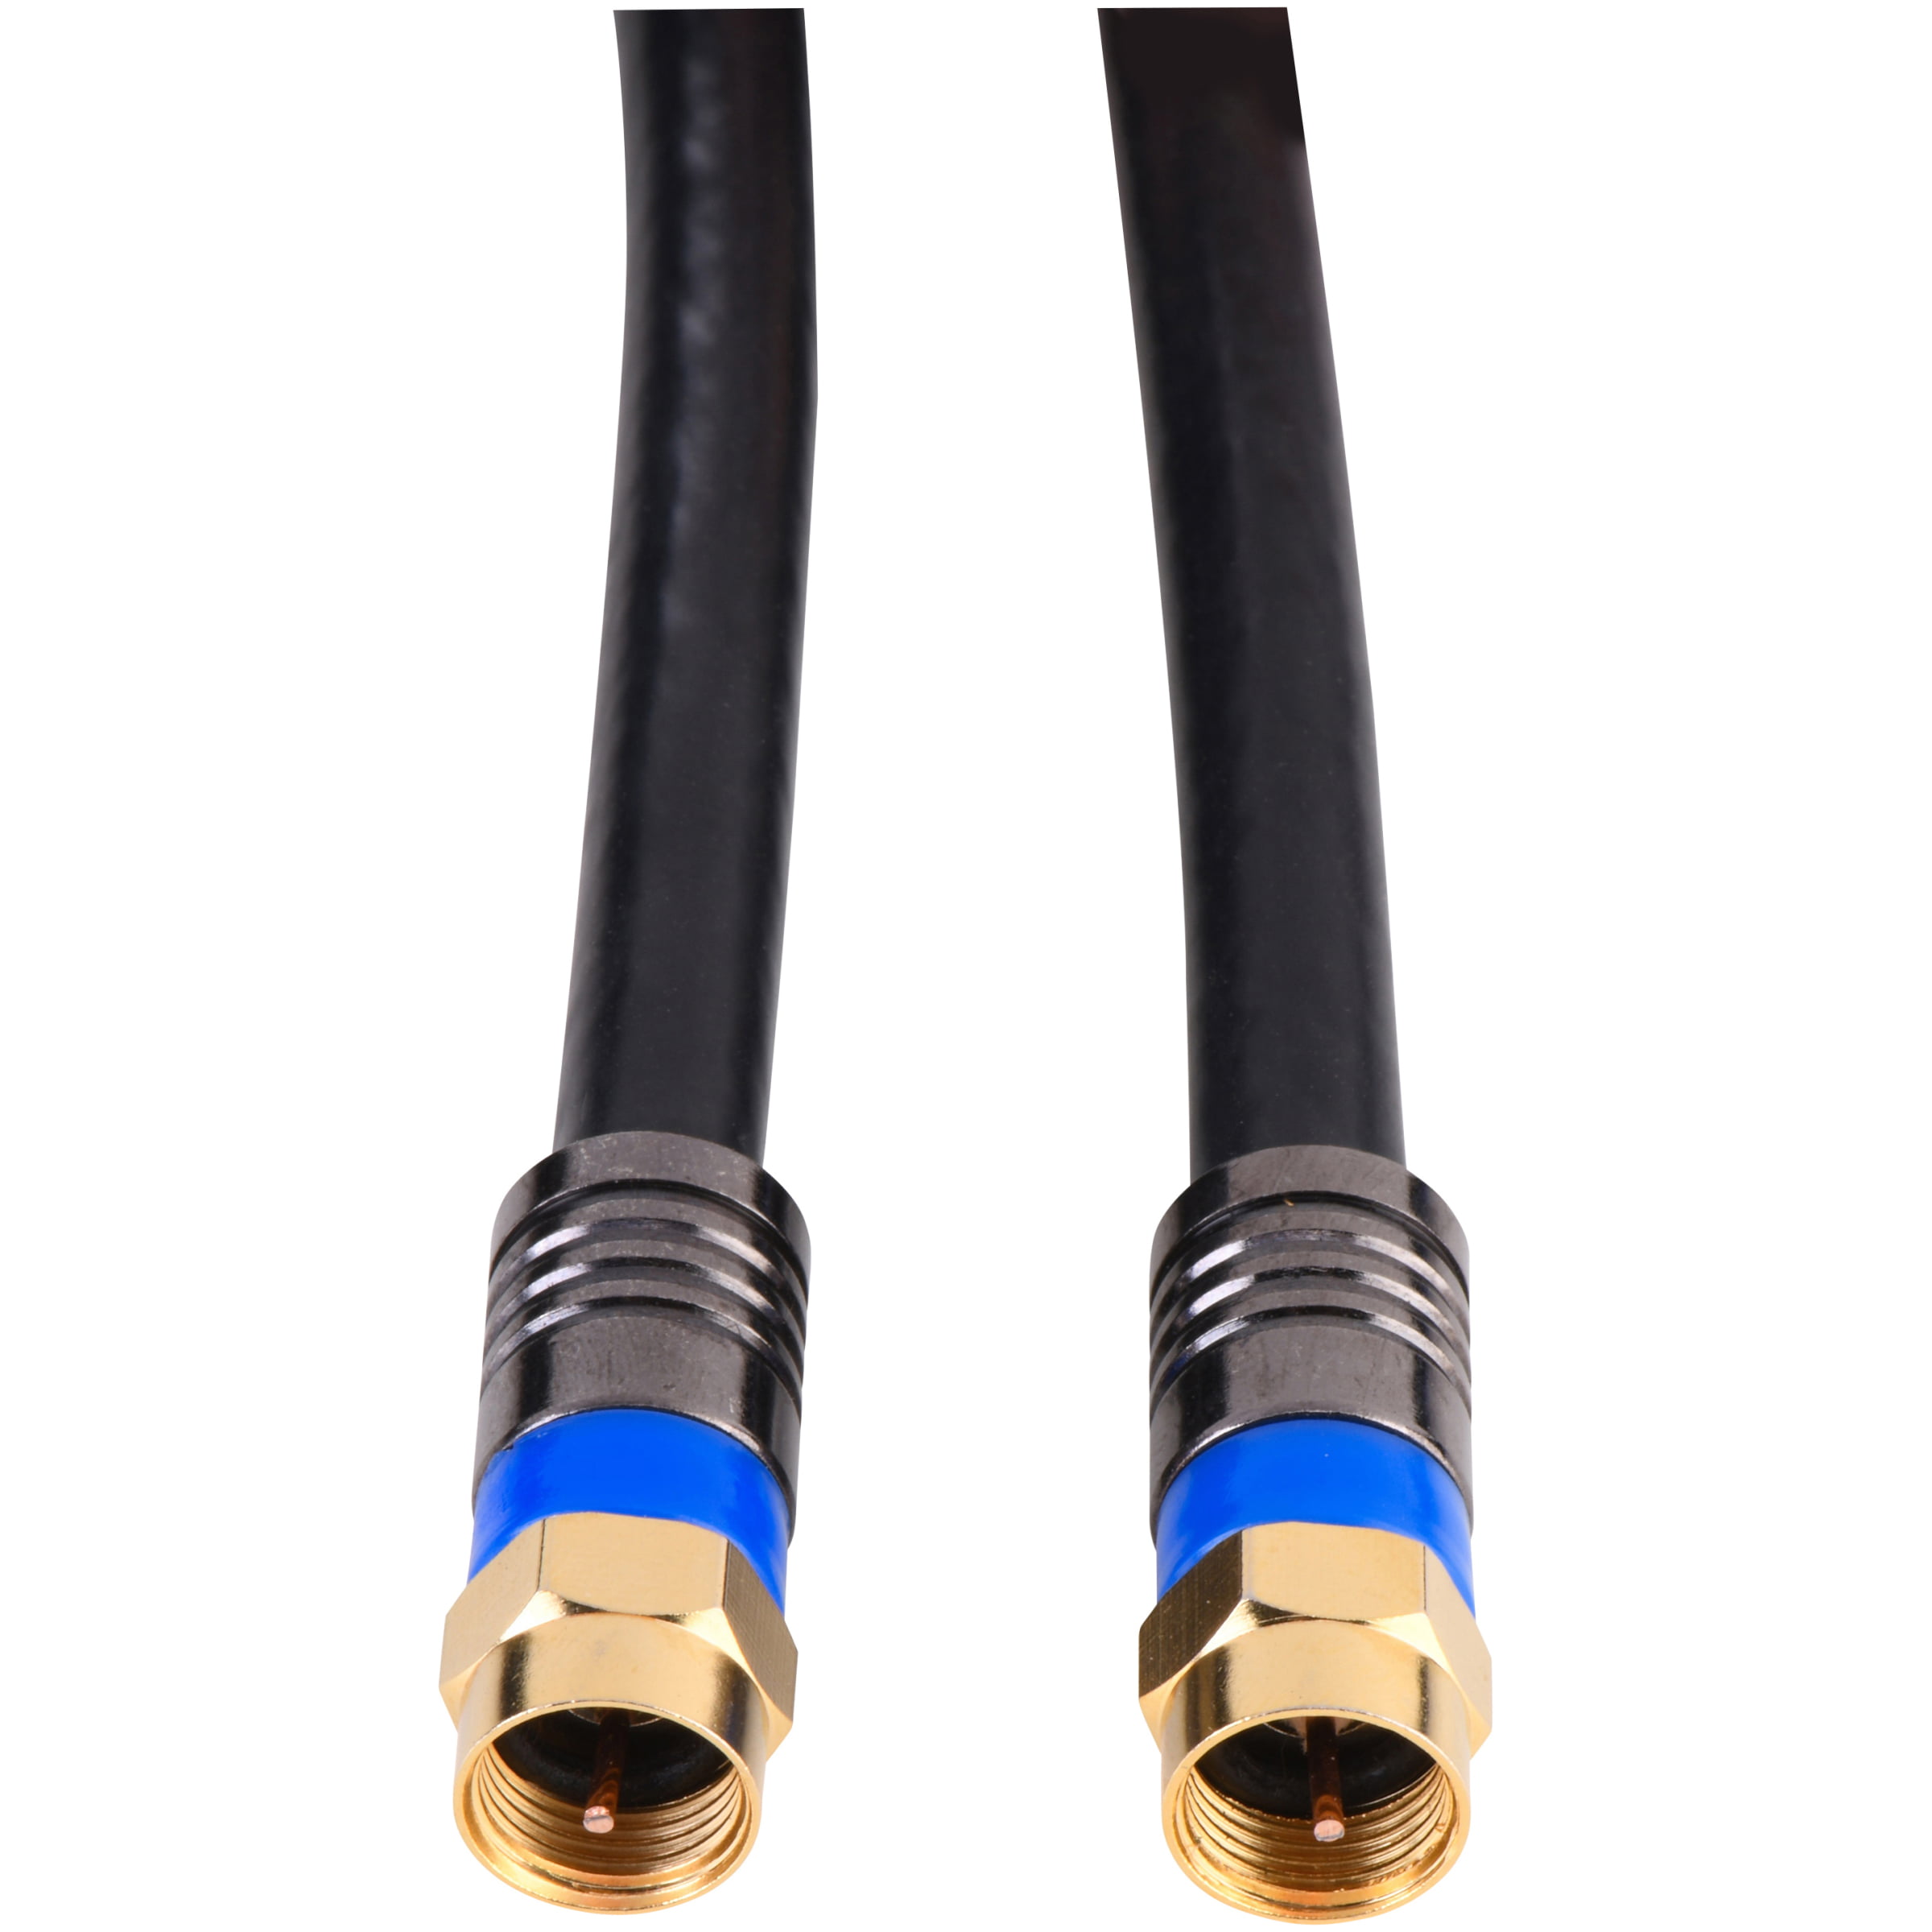 Coax+ 500’ Black Coaxial Cable - Professional-Grade | Channel Master